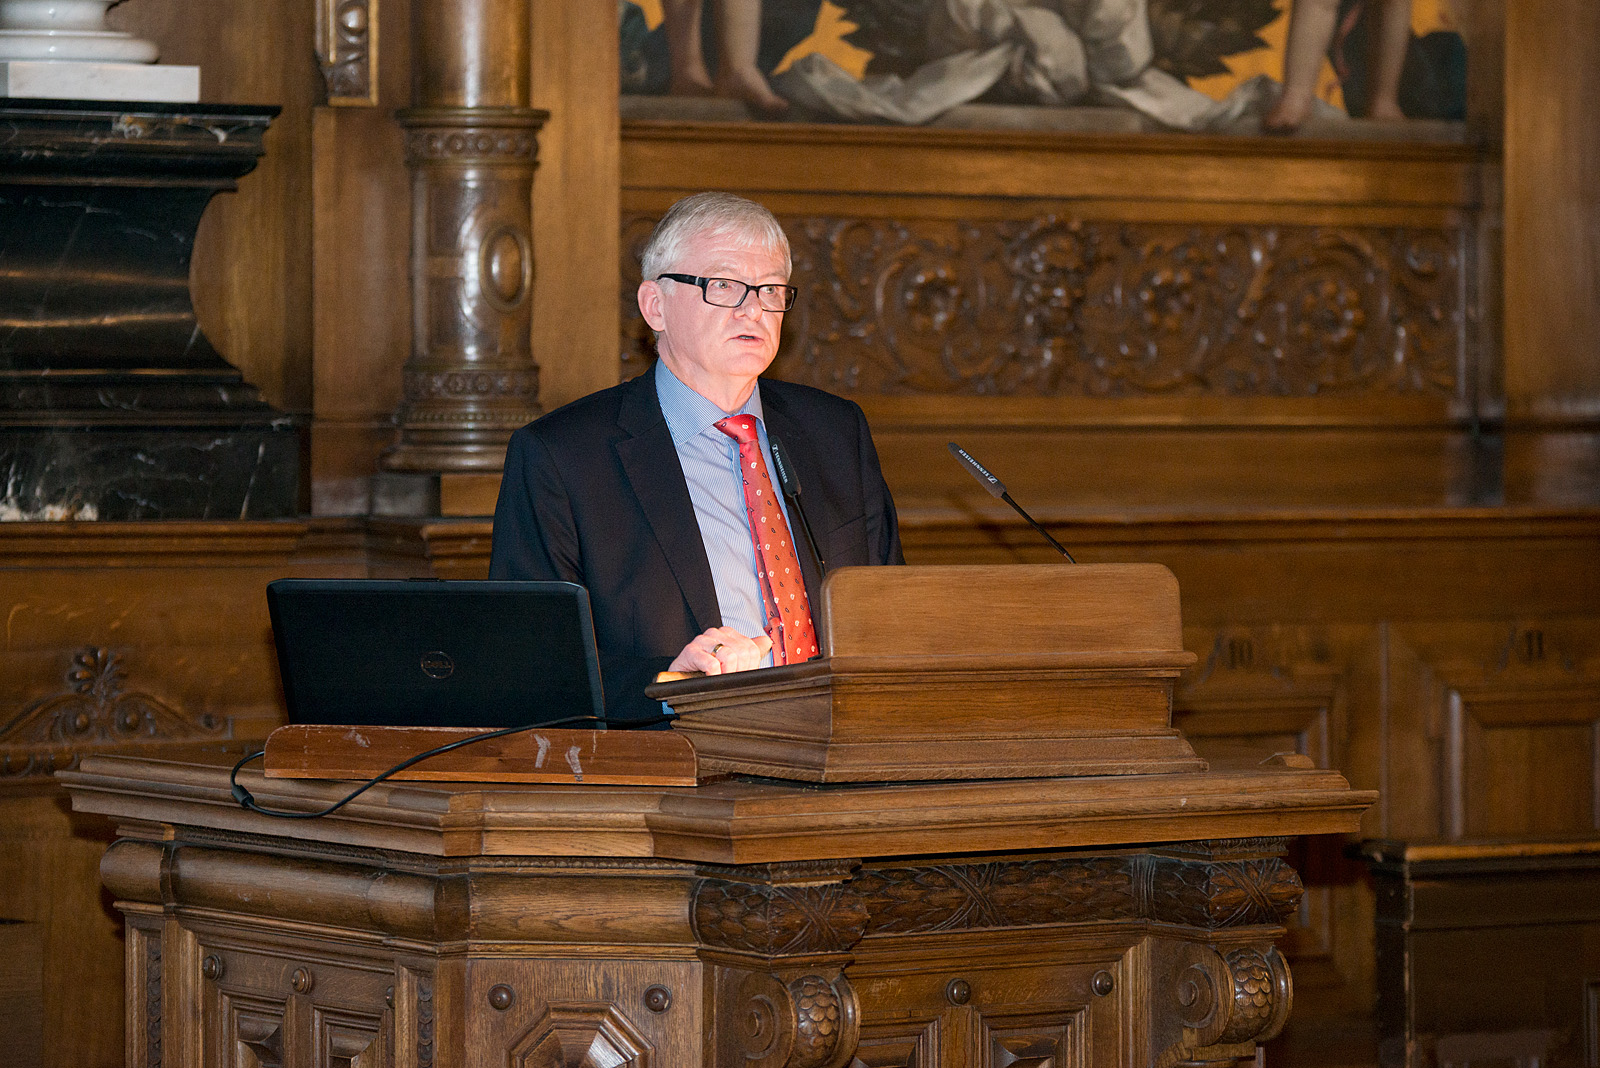 22 October, 2015 | OPENING LECTURE: Welcome address of the Dean of the Faculty of Philosophy, Gerrit Kloss